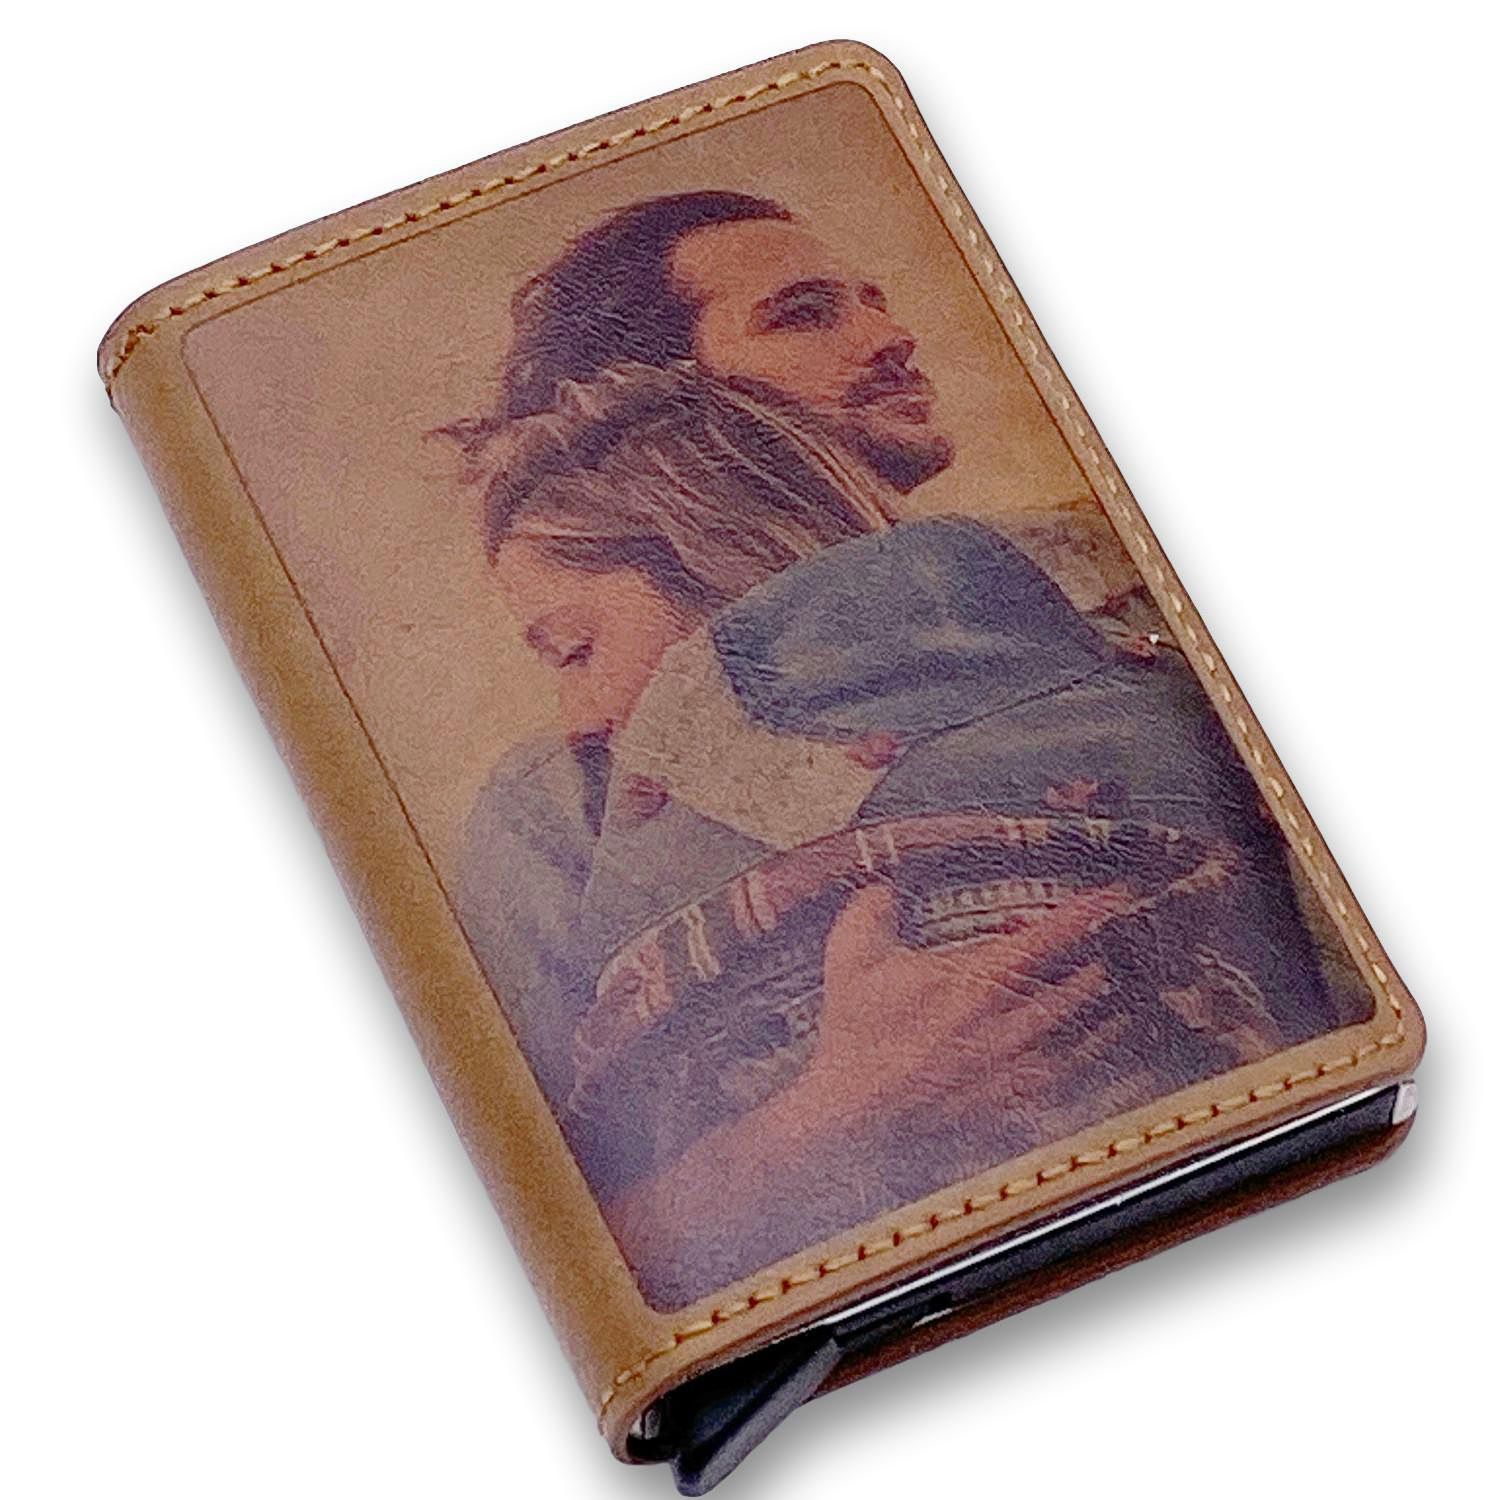 Customizable leather business card holders Valentine's Day gift idea Leather business card holders painted with coffee